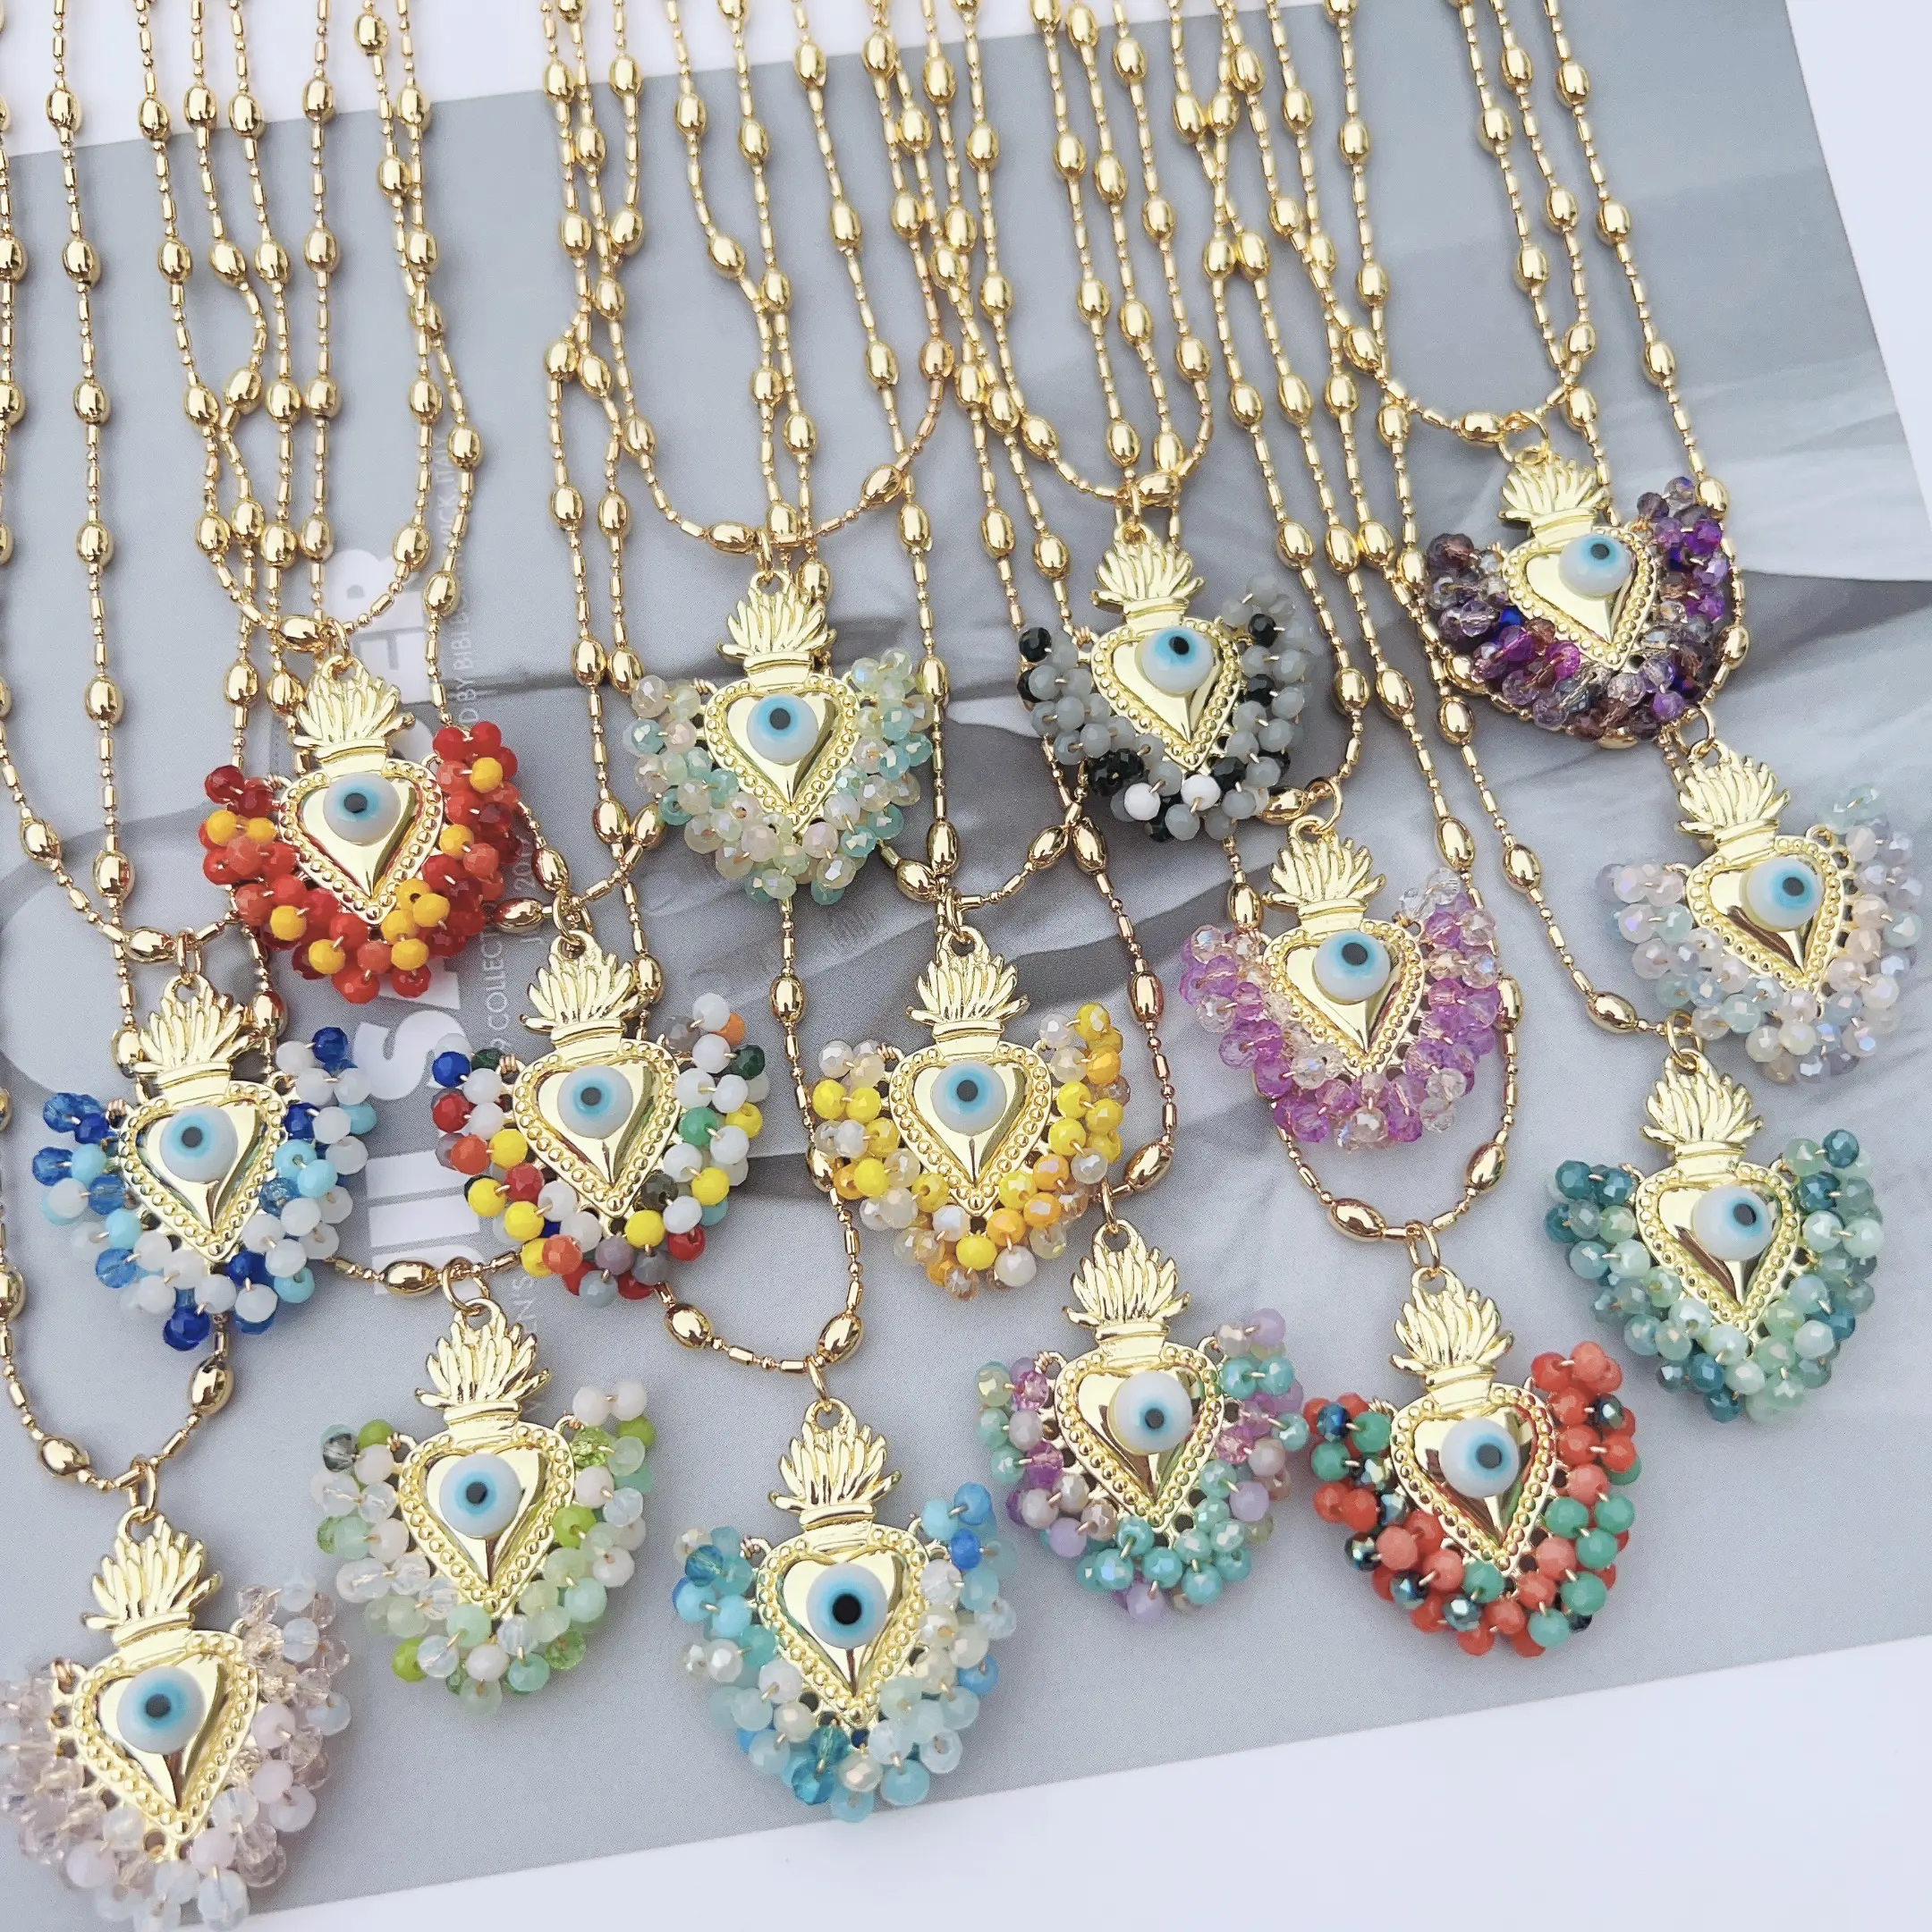 Hot Selling New Model Heart Charm Necklace Colorful Beads Lucky Eye Pendant Choker Women Wholesale Party Gift Jewelry